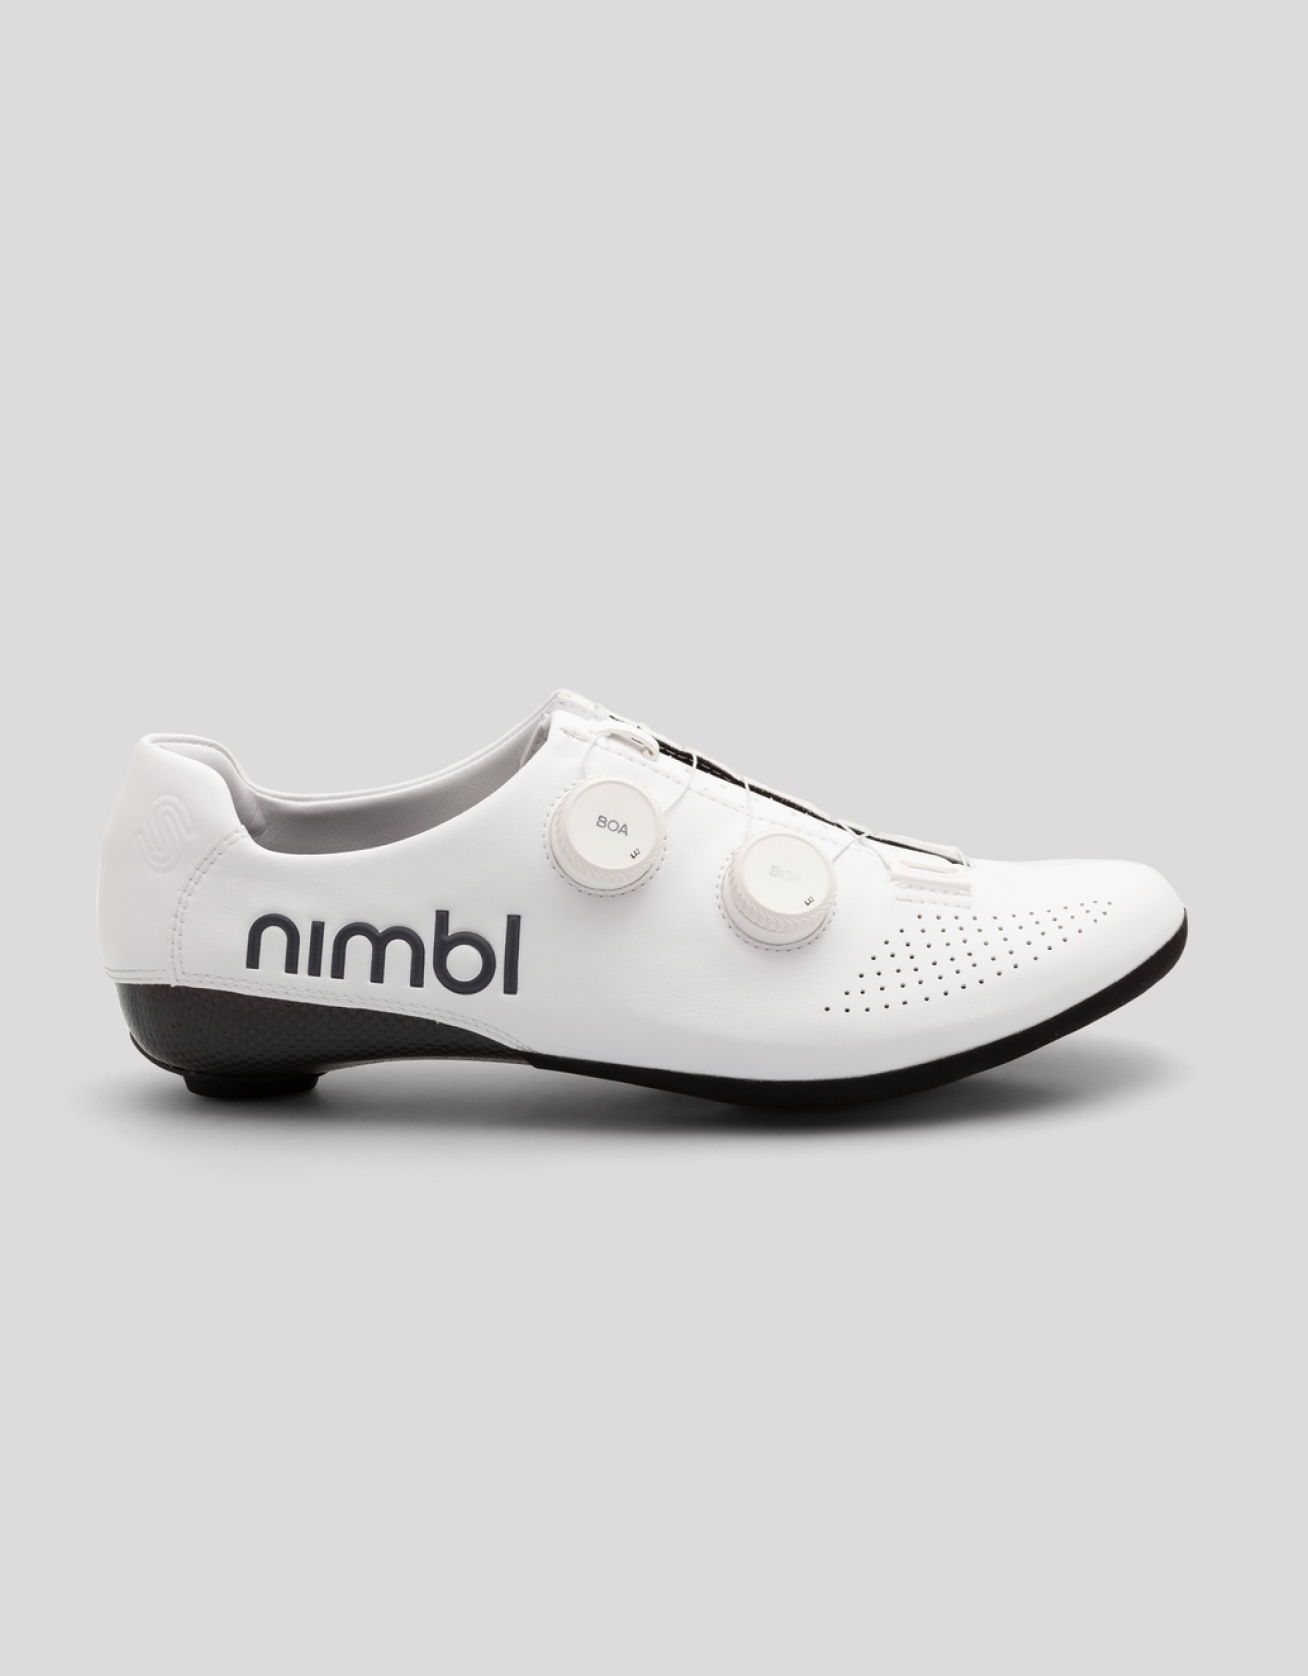 Nimbl Exceed All-White